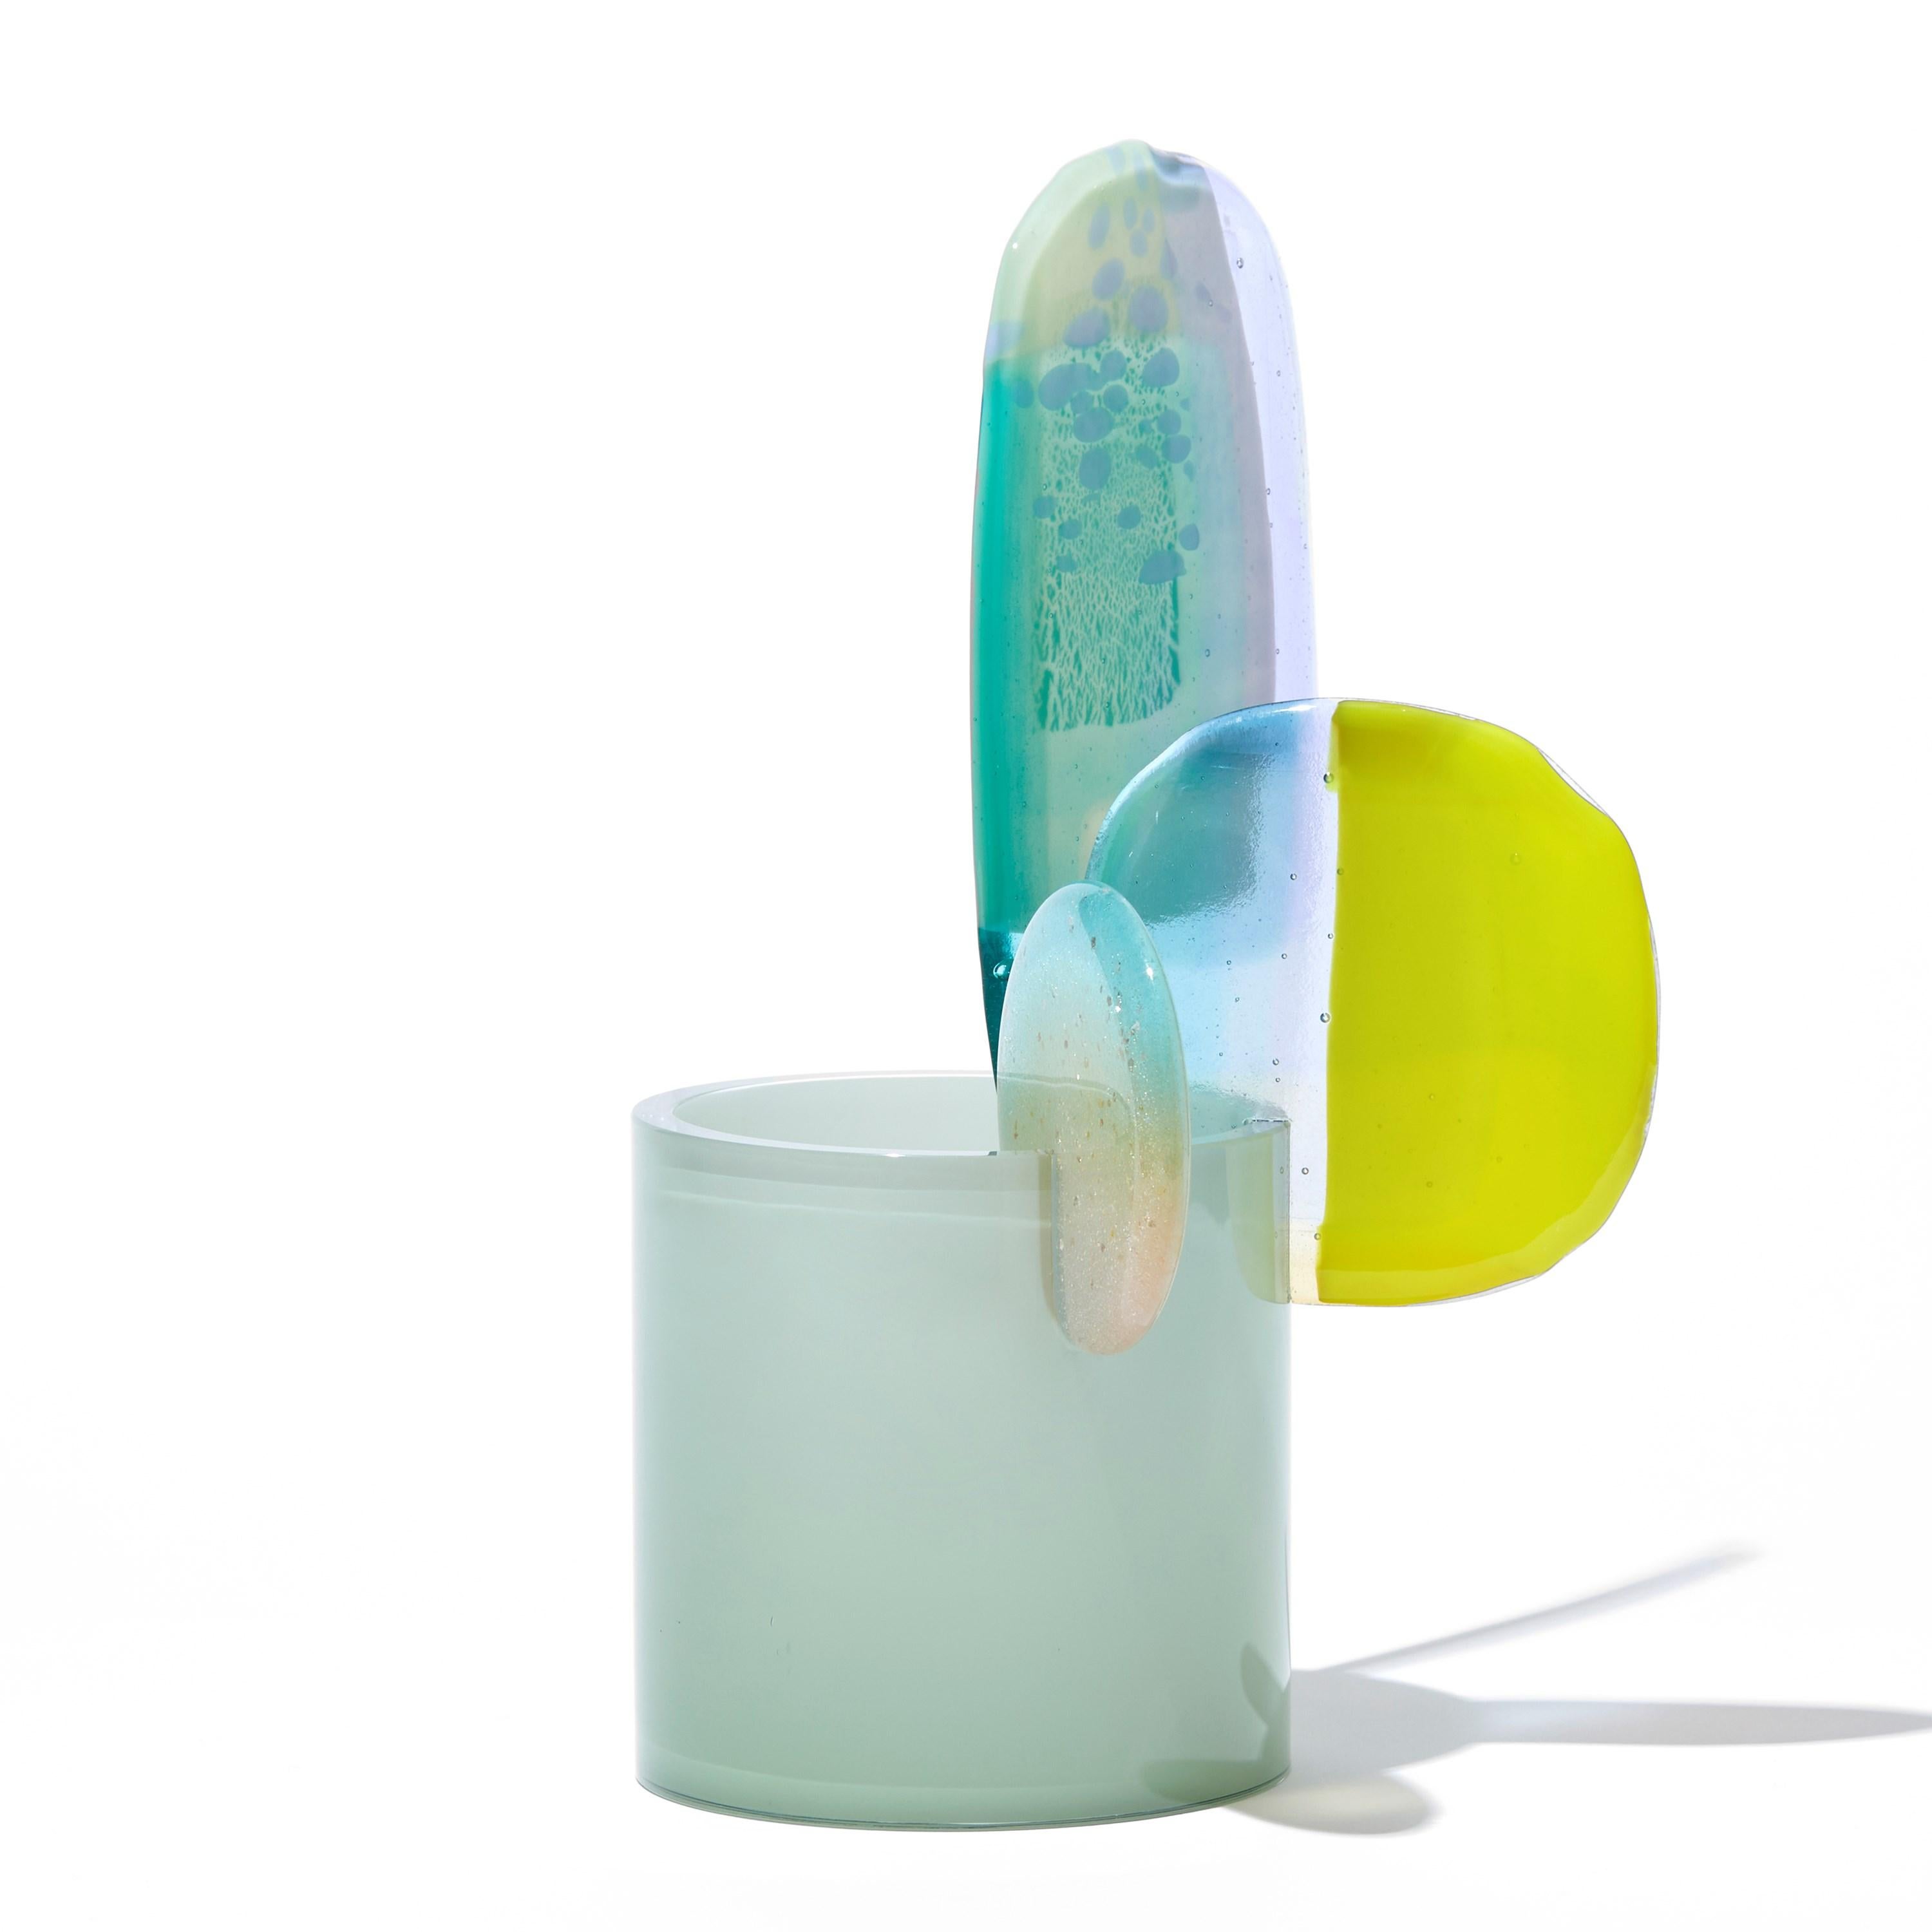 Organic Modern Paradise 08 in Celadon, a jade, yellow & lilac glass sculpture by Amy Cushing For Sale